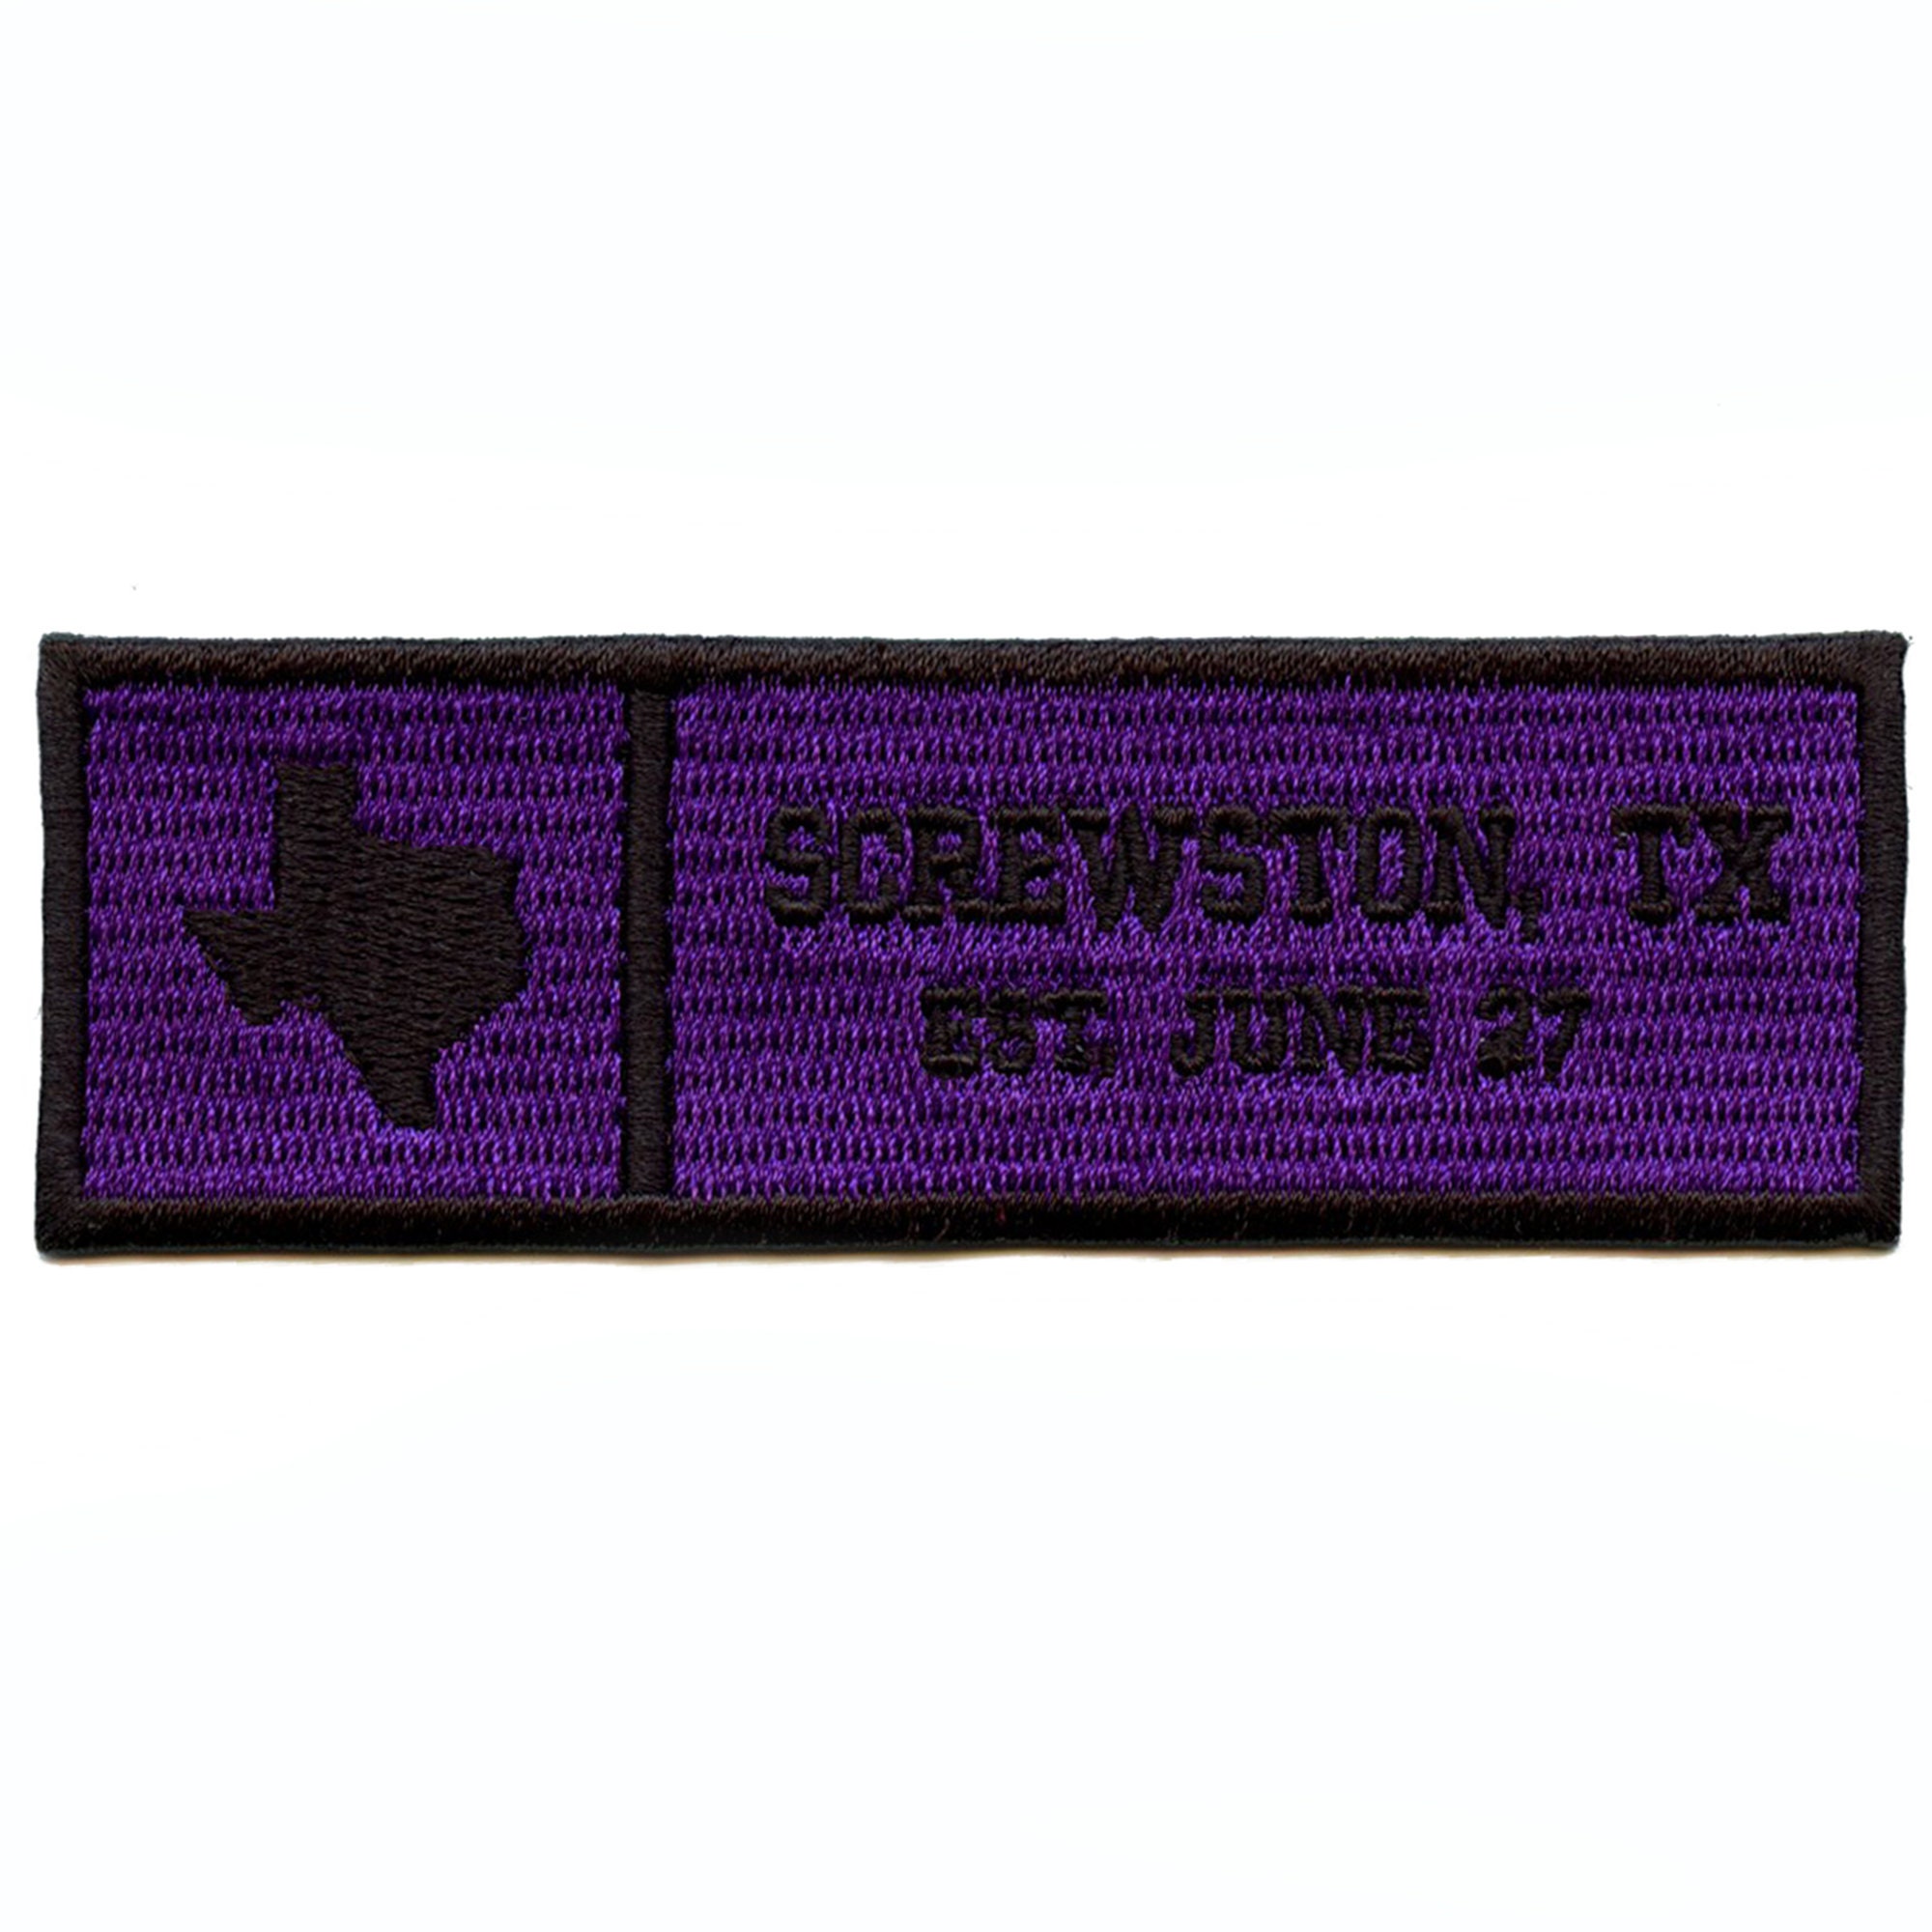 Texas Screwston Cassette Tape Patch Houston Music State Embroidered Iron On  